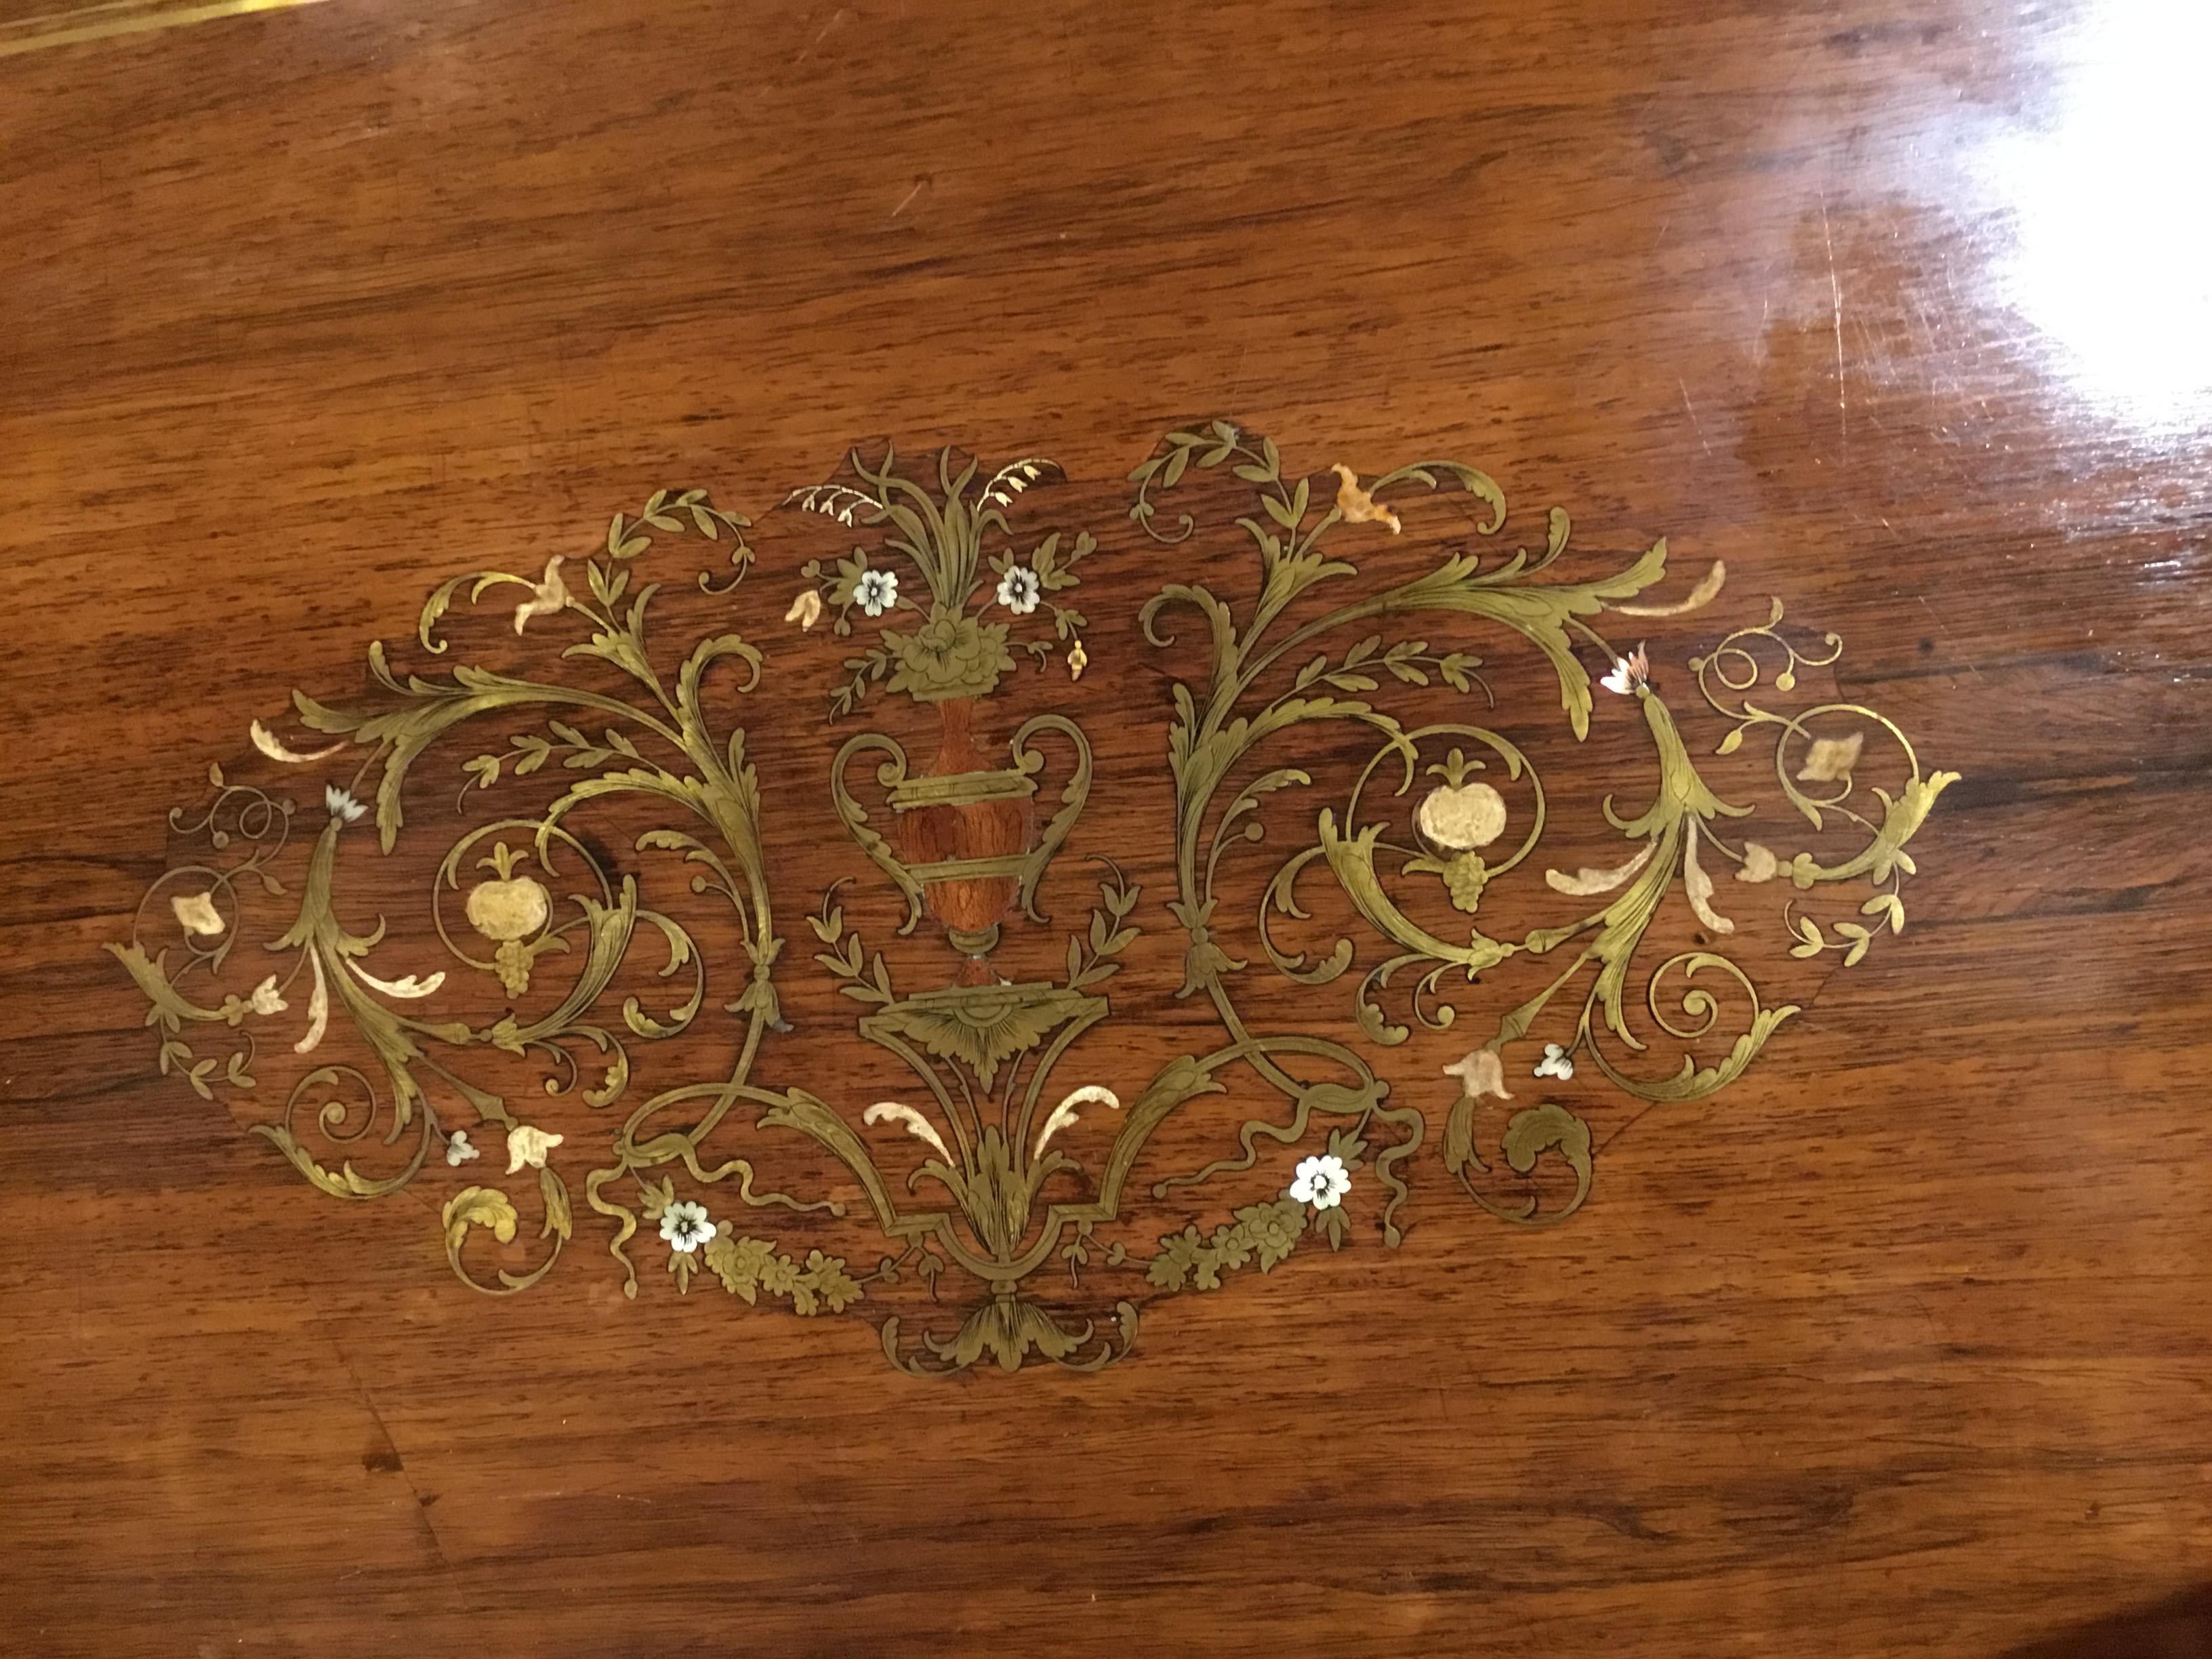 Rosewood oval center table with brass inlay designs with touches of mother of pearl.
Gilt bronze mounts on the gadrooned edge with gilt bronze flutes. Superb patina and color
The oval top resting on tapered legs held by a contoured stretcher.